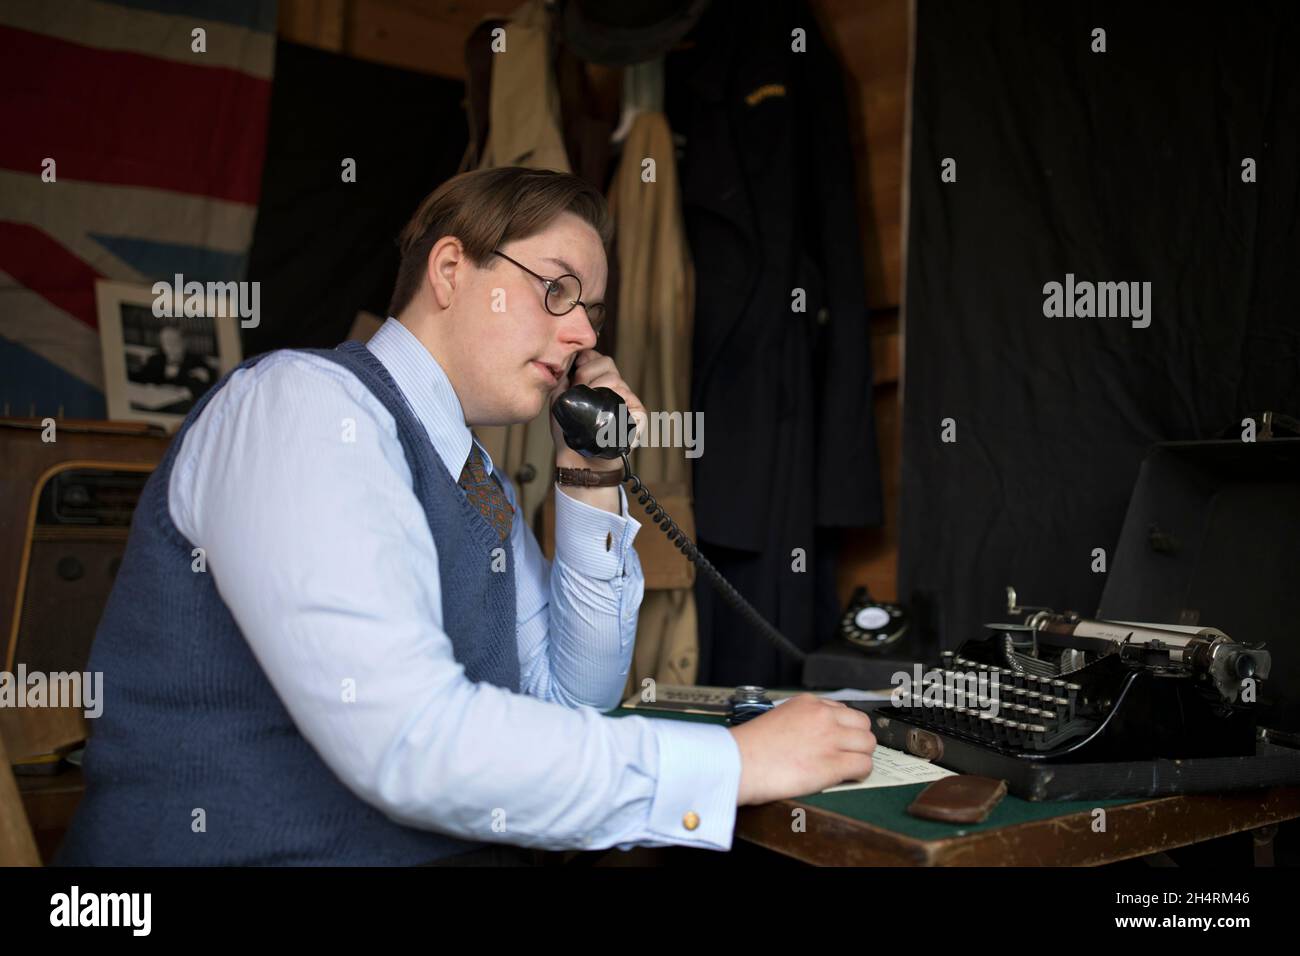 Young civilan man on telephone in voluntary role as ARP warden in 1940s wartime Britain. ARP duties could in administrative and clerical duties. Stock Photo